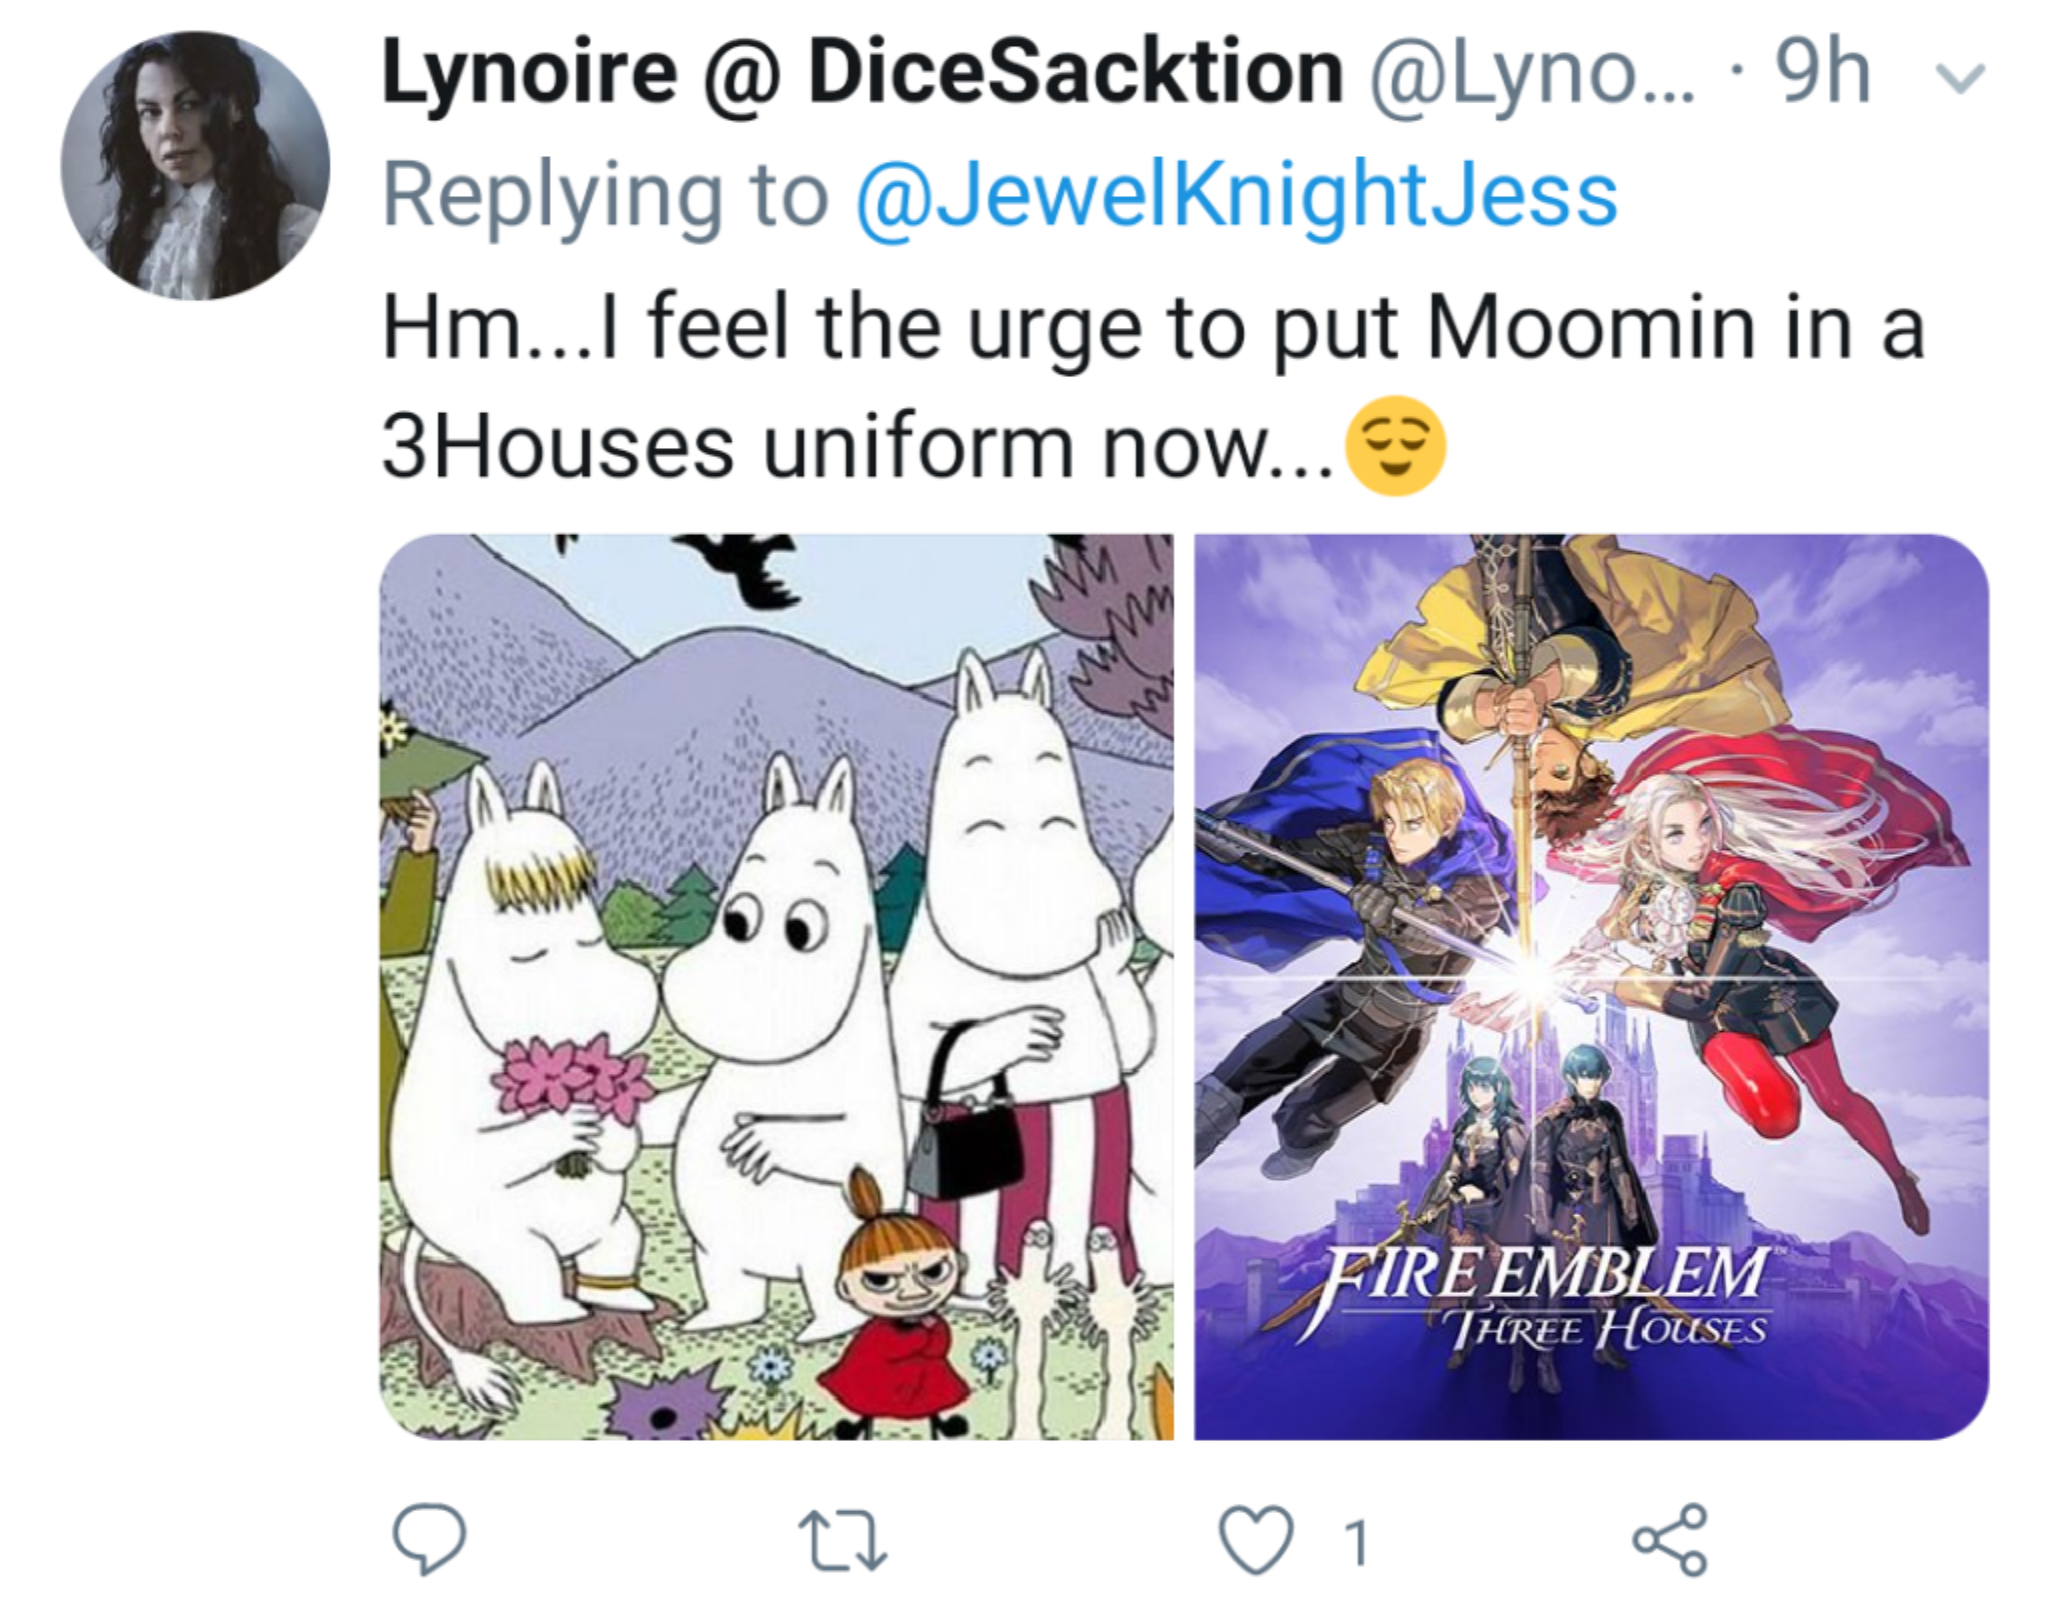 moomin - Lynoire @ DiceSacktion .... 9h v Jess Hm...I feel the urge to put Moomin in a 3Houses uniform now...? Fire Emblem Three Houses